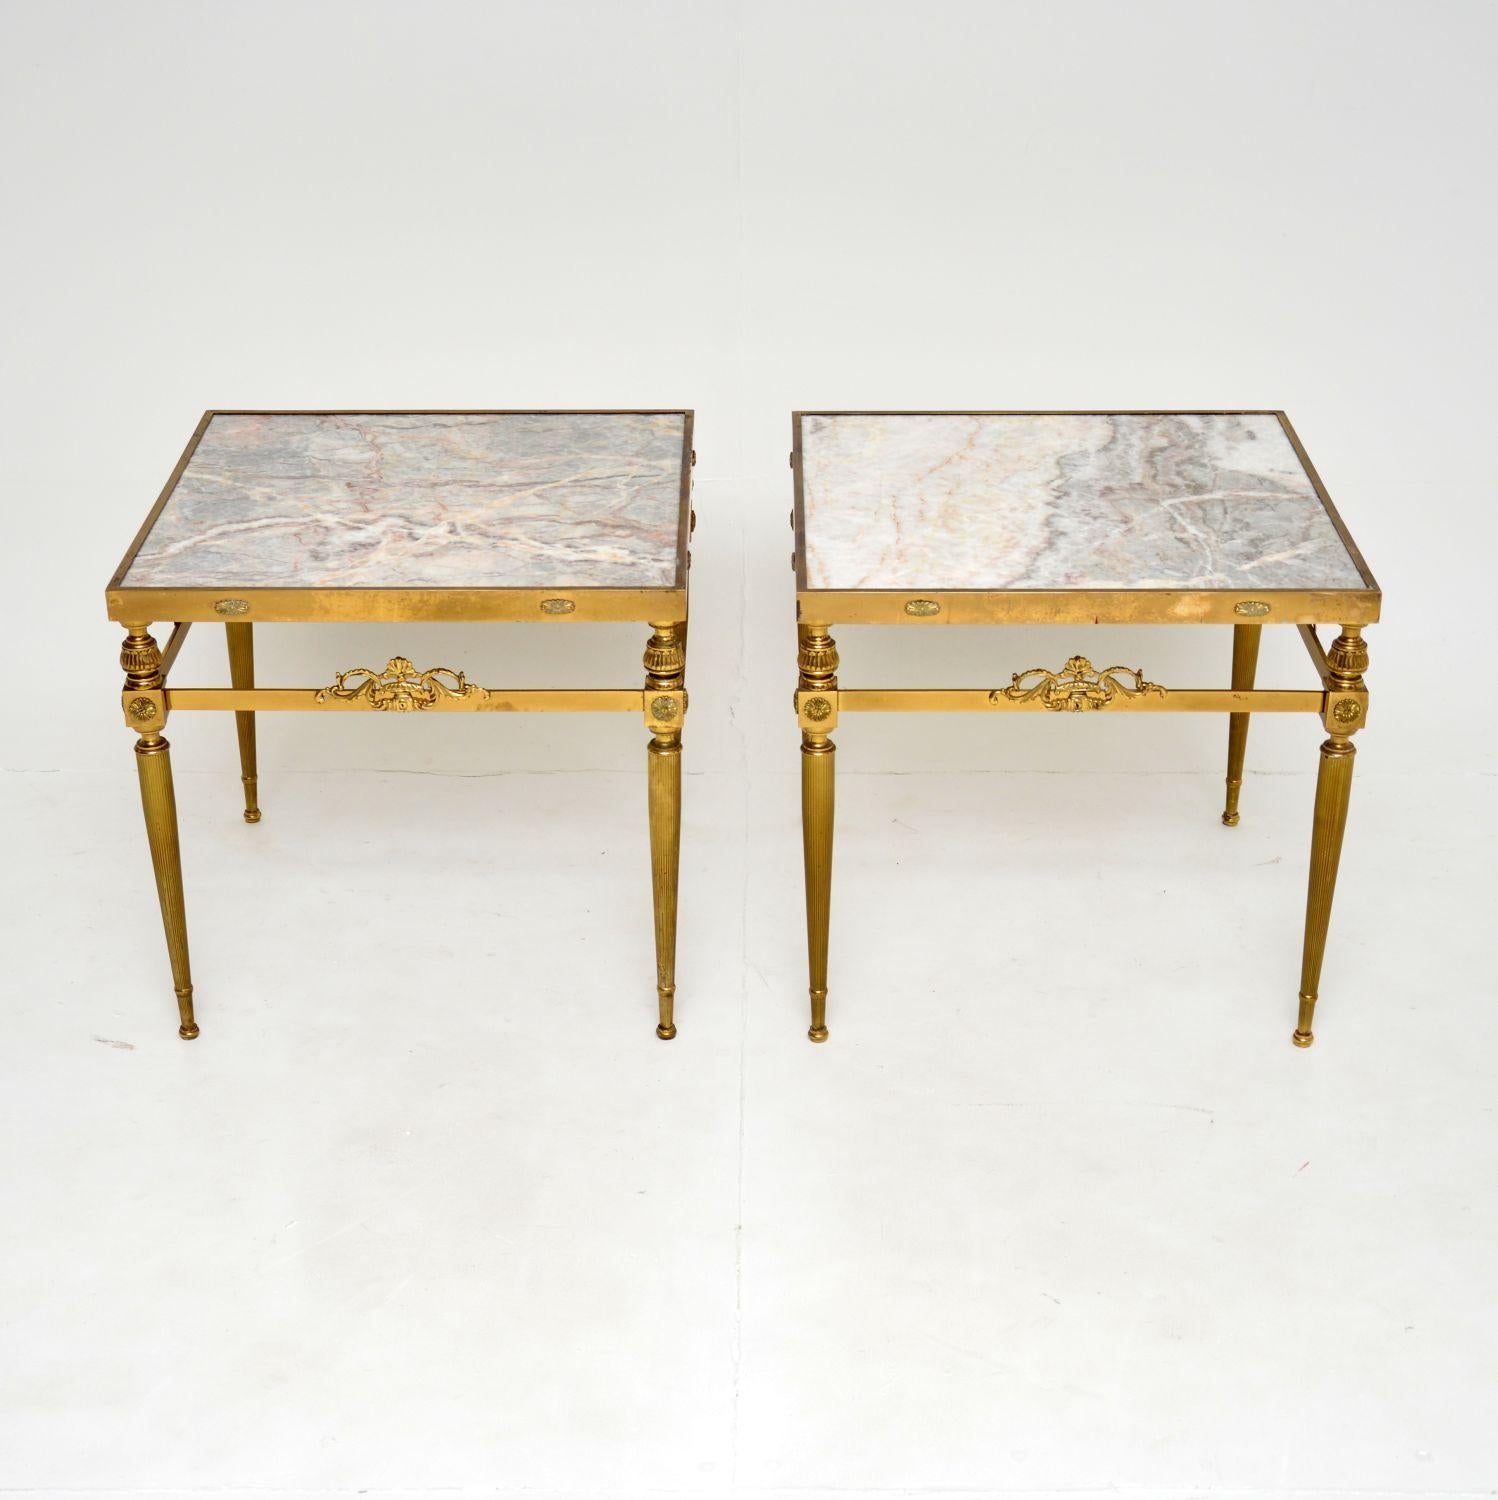 A beautiful pair of vintage solid brass side tables with inset marble tops. These were made in France, they date from the 1950-60’s.

They are of super quality and have a stunning design. The solid brass frames have fluted legs and wonderful